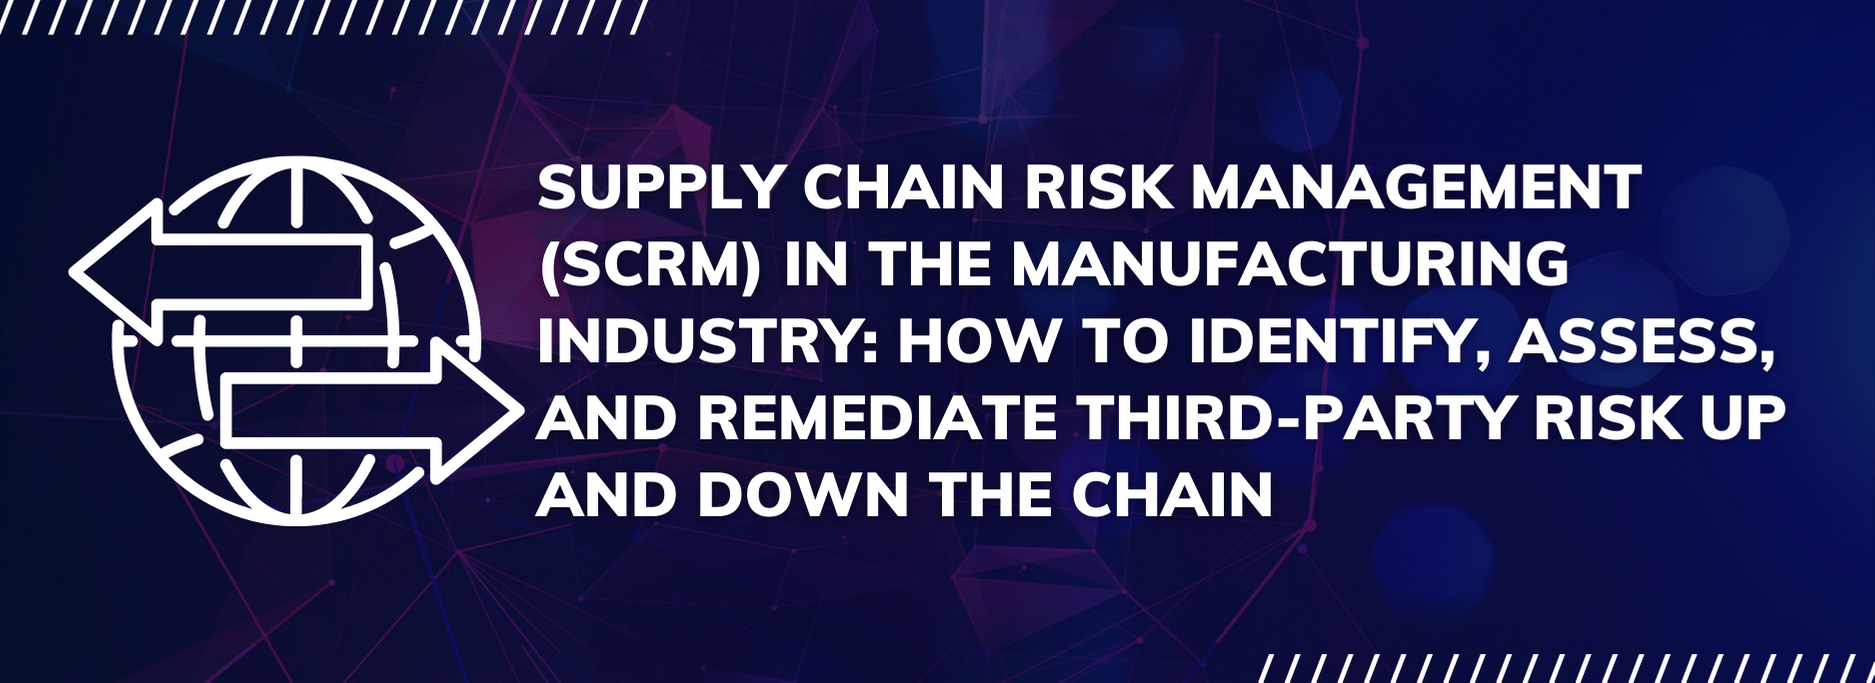 Supply Chain Risk Management (SCRM) in the Manufacturing Industry: How to Identify, Assess, and Remediate Third-Party Risk Up and Down the Chain